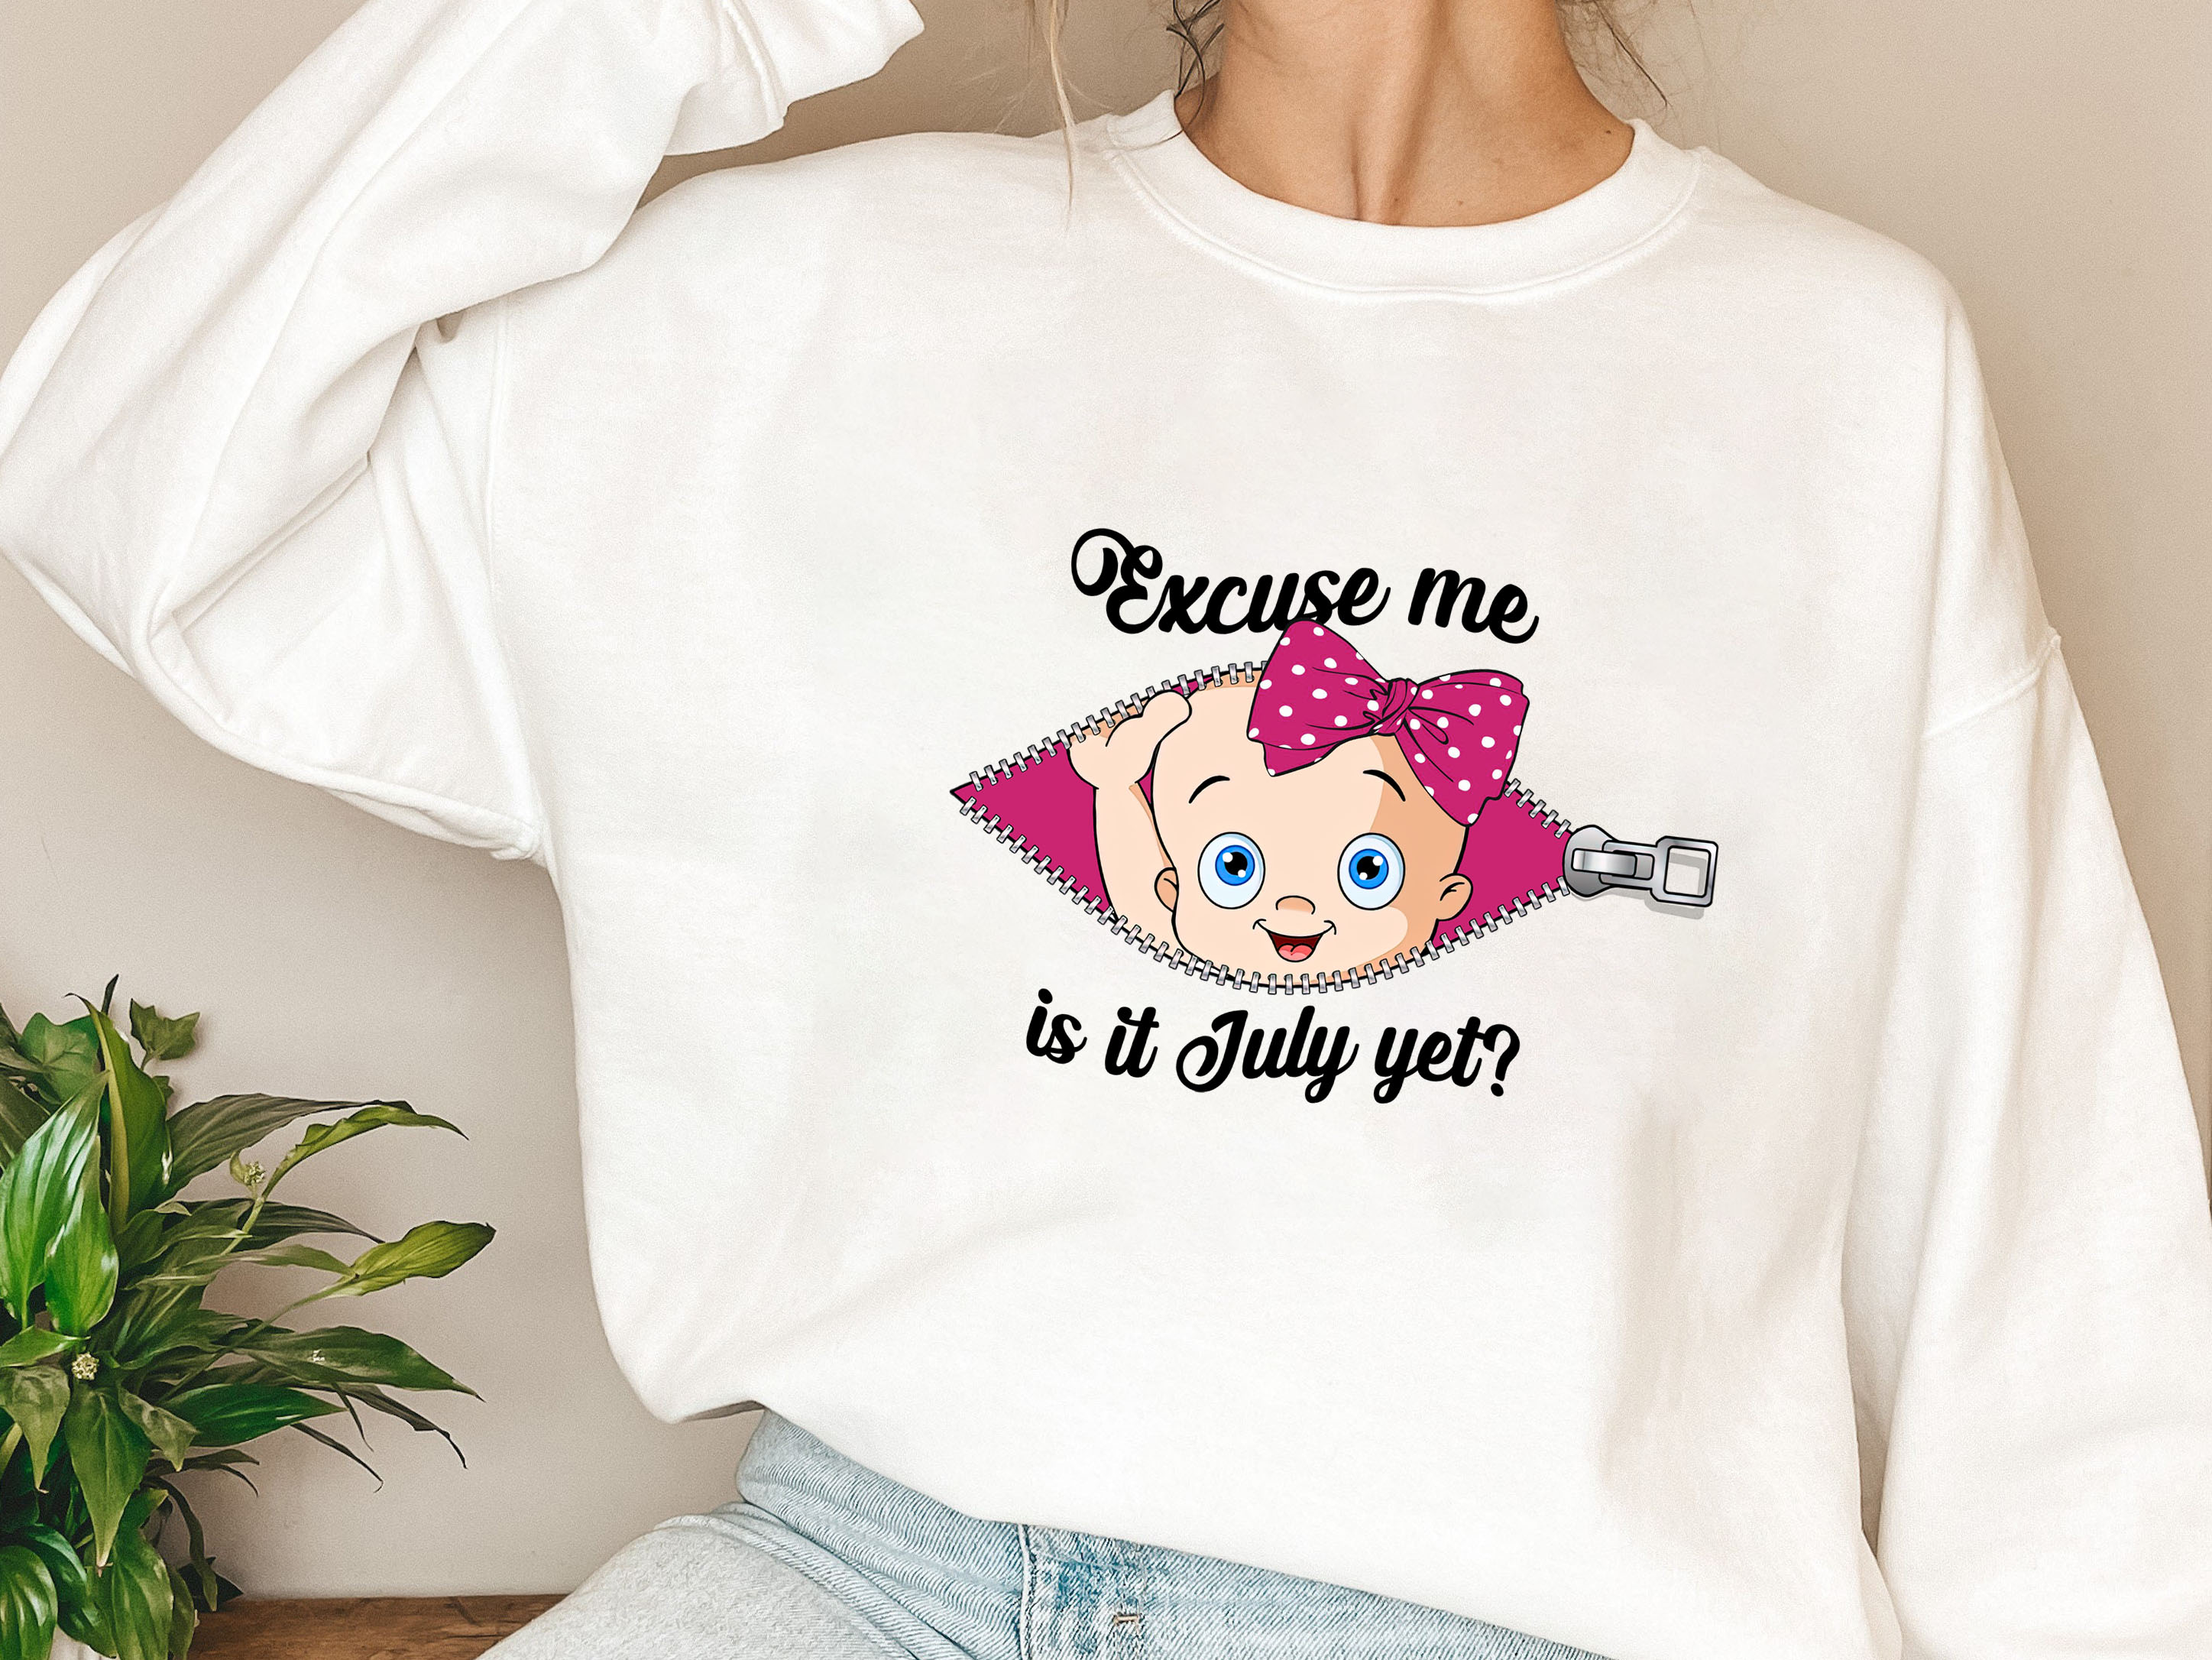 Funny Pregnancy T-shirt Maternity Top WIFI Baby Shower New 